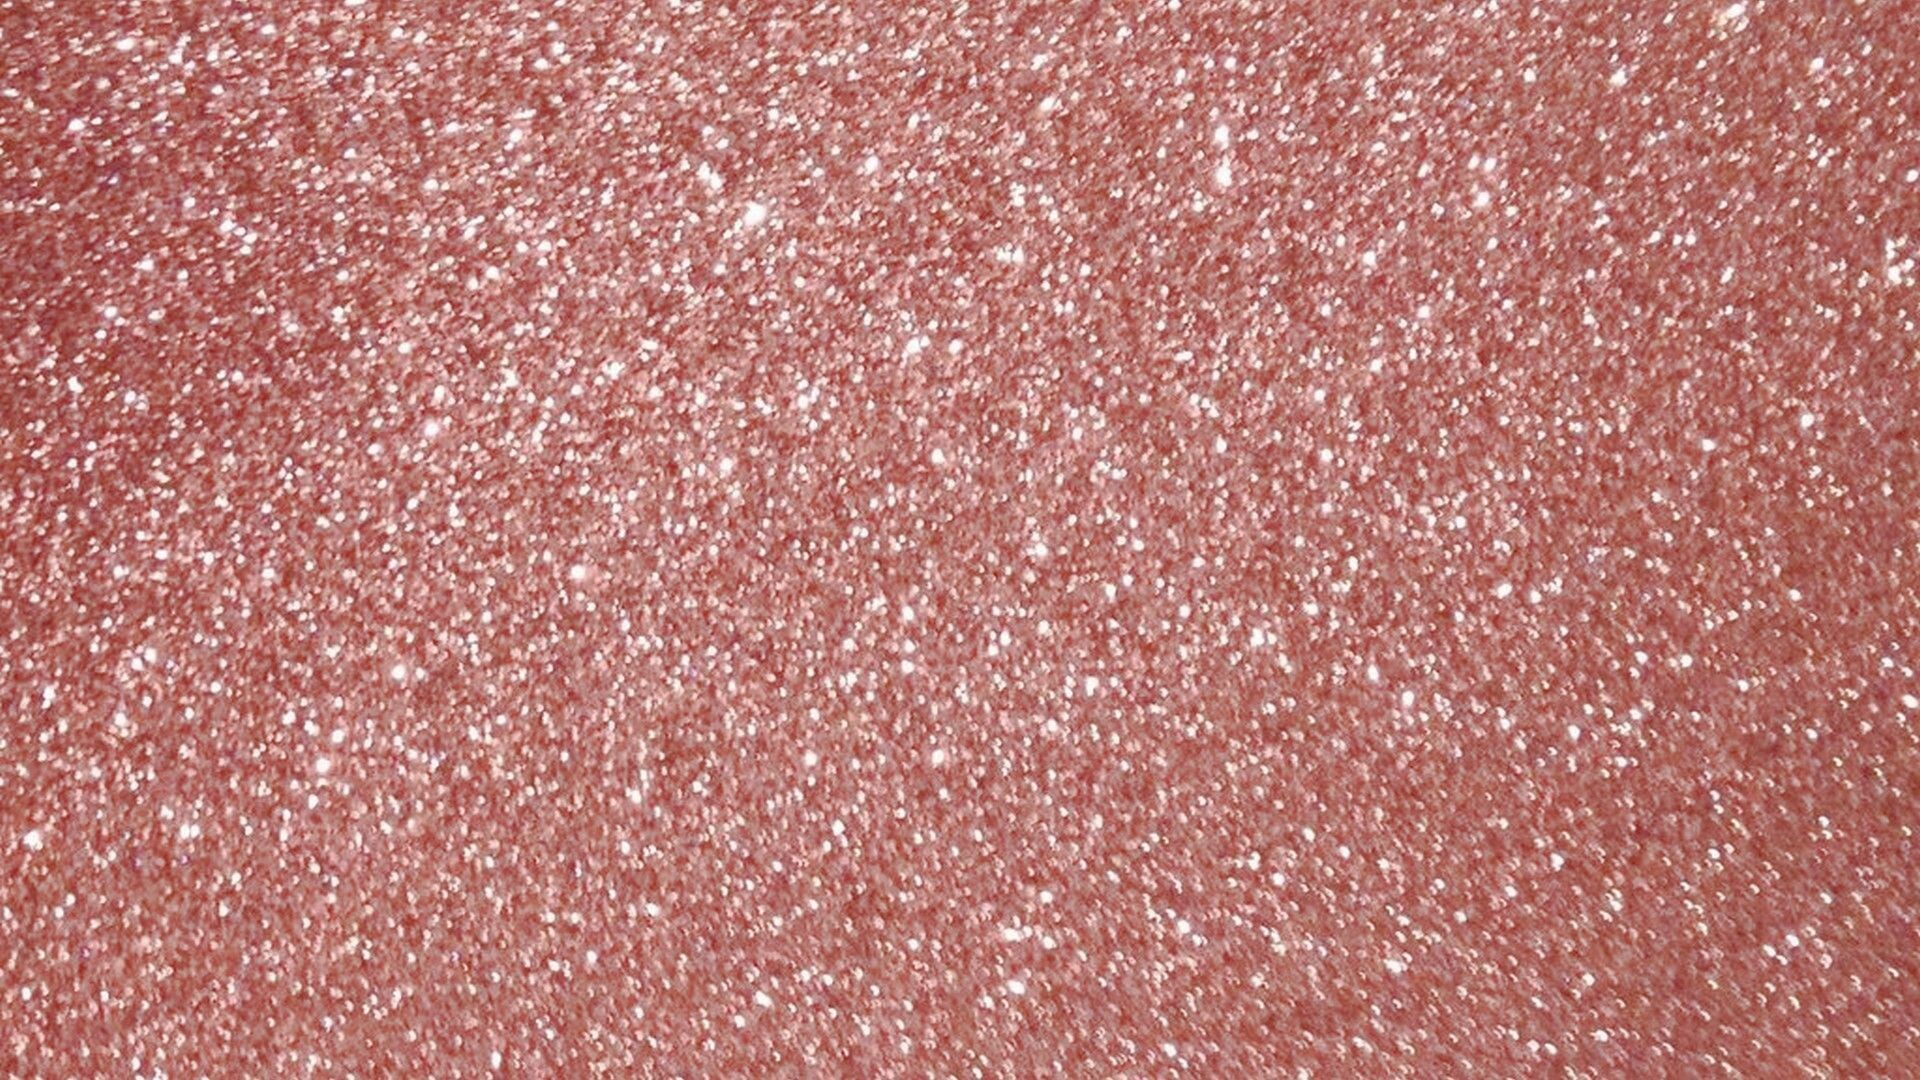 Sparkle: Pink glitter, Used by glam rockers, such as David Bowie, Gary Glitter and Iggy Pop. 1920x1080 Full HD Wallpaper.